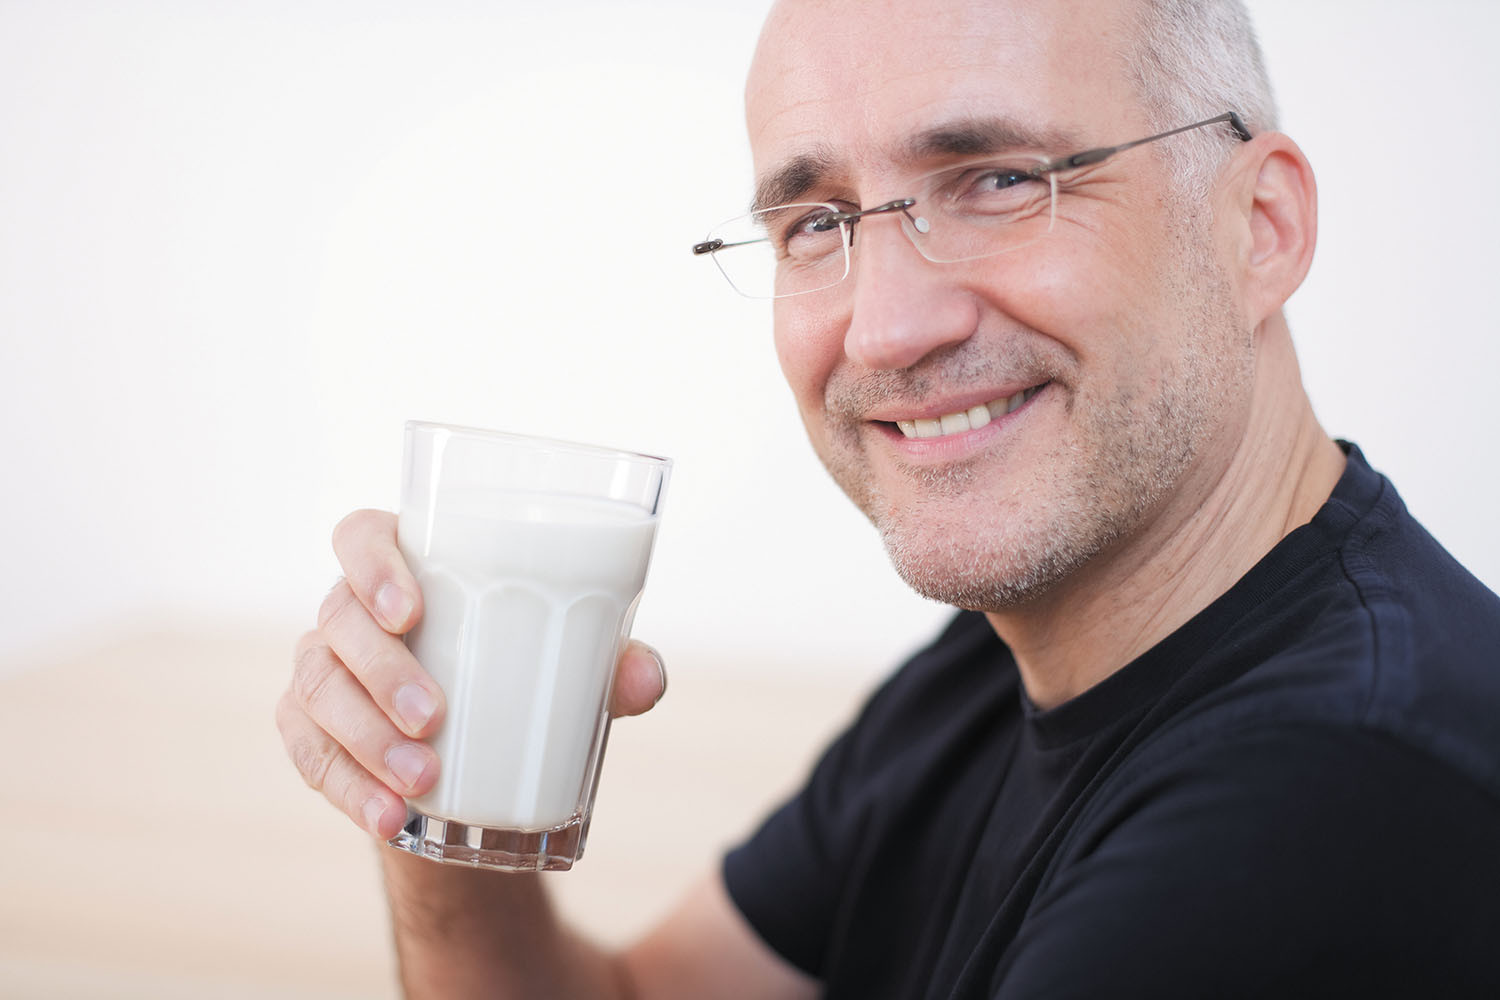 photo of a mature man smiling and holding a glass of milk